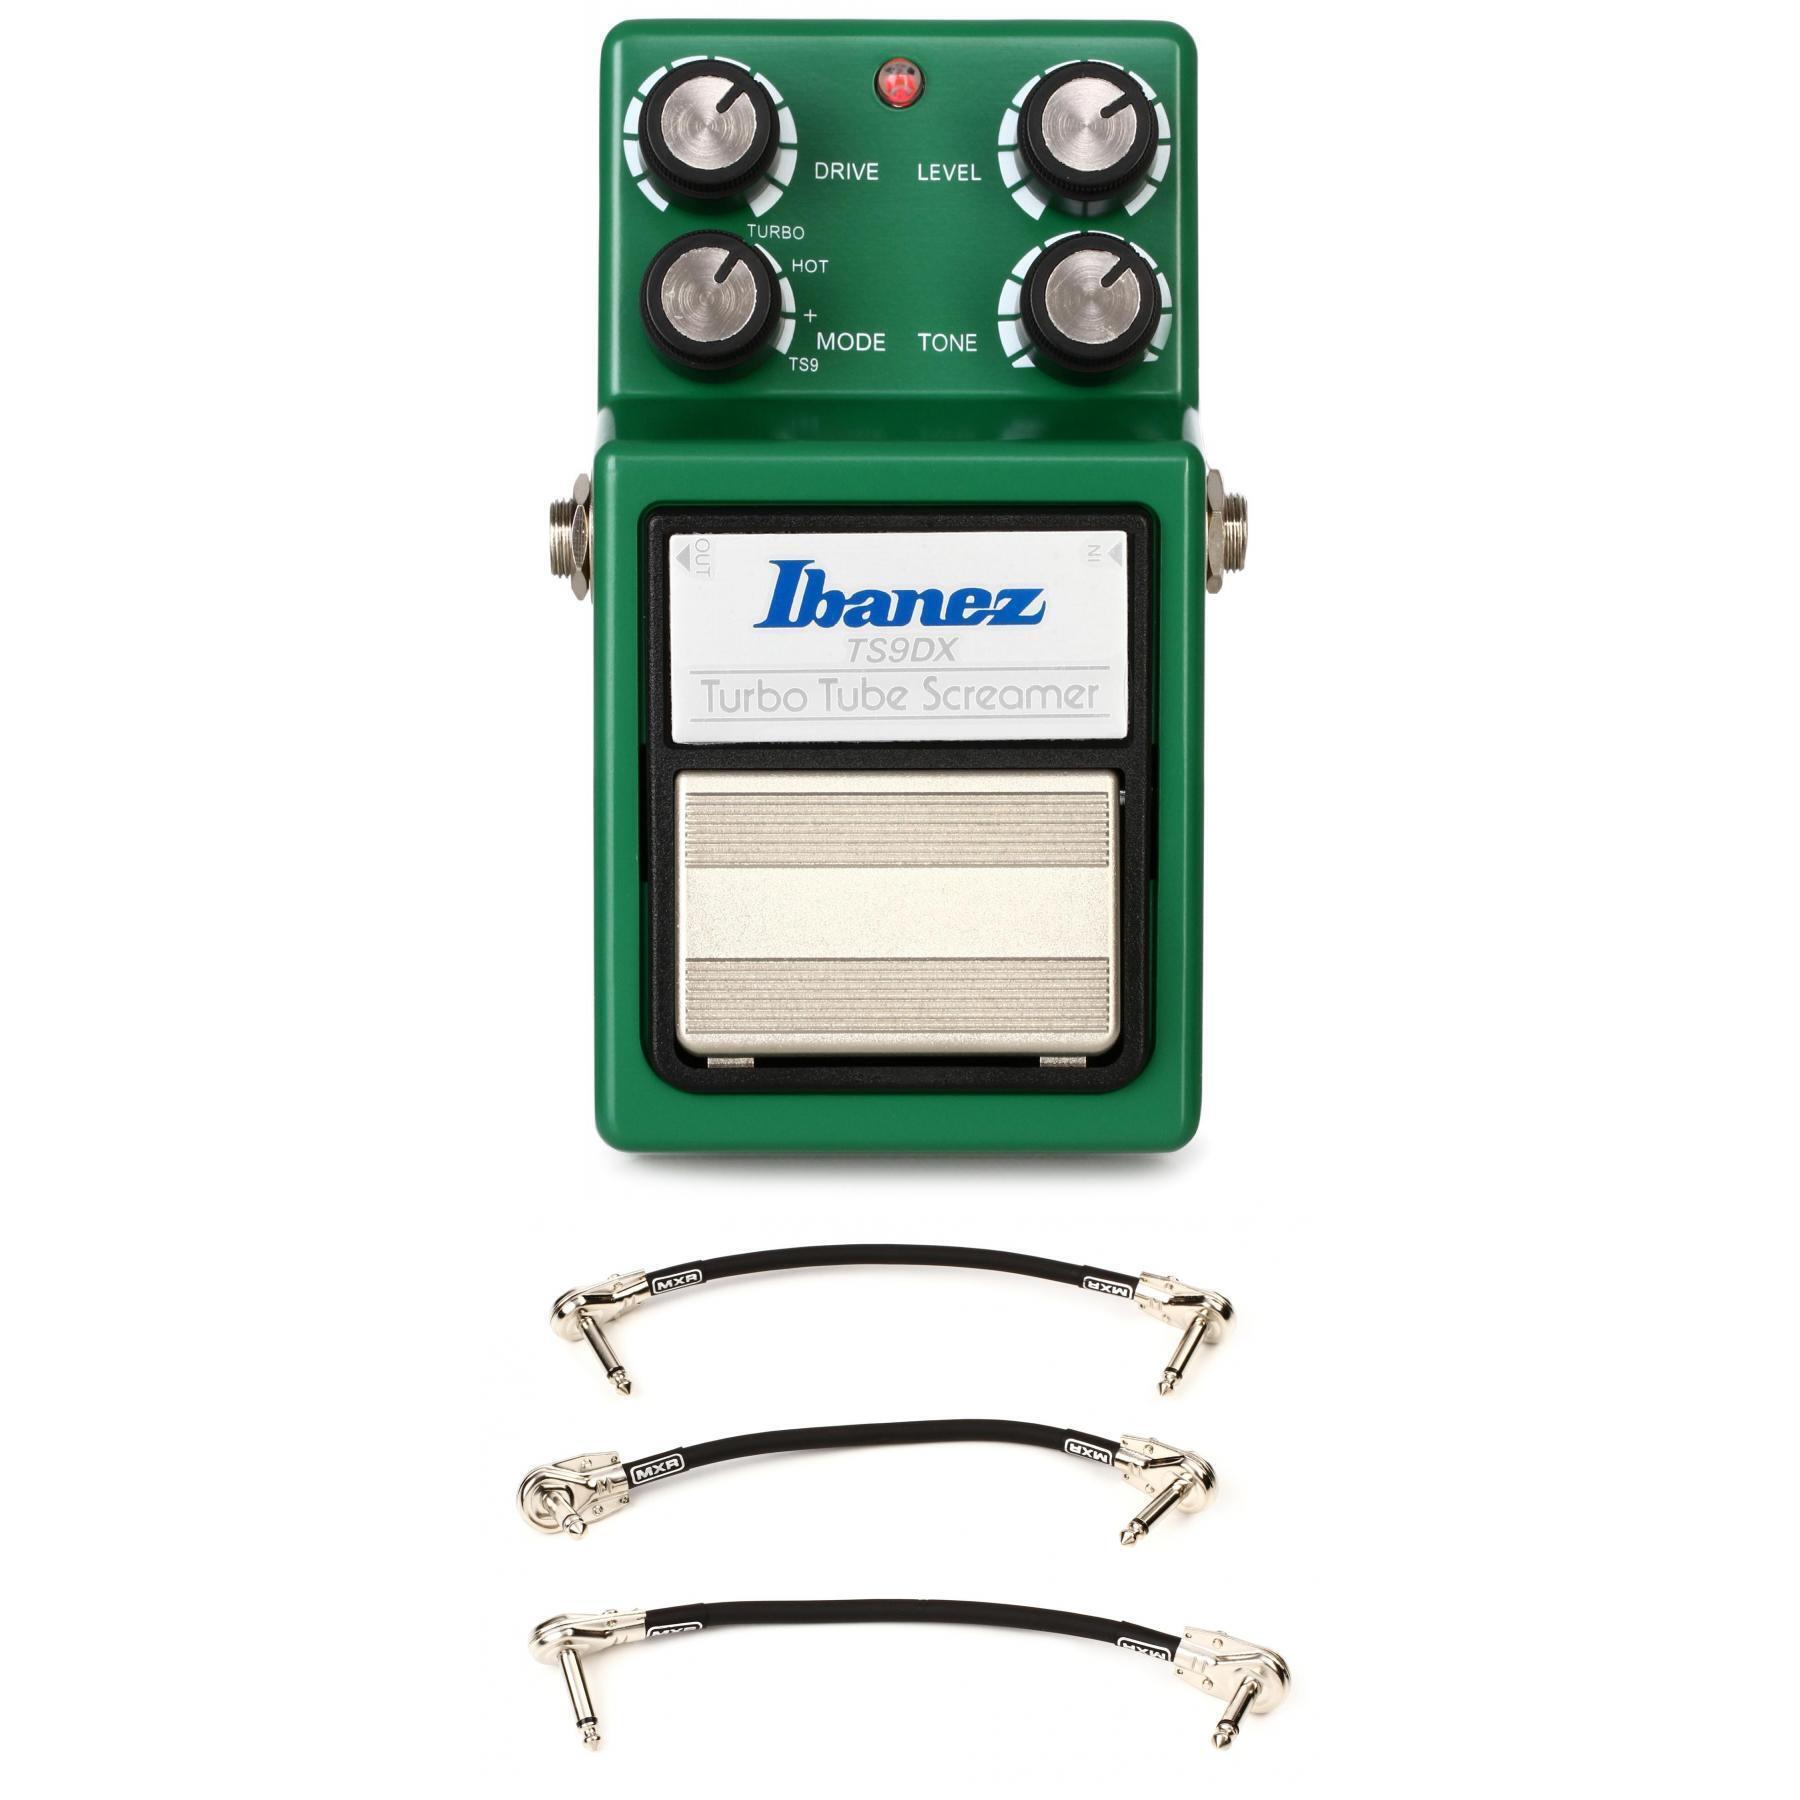 Ibanez TS9DX Turbo Tube Screamer Overdrive Pedal with Patch Cables